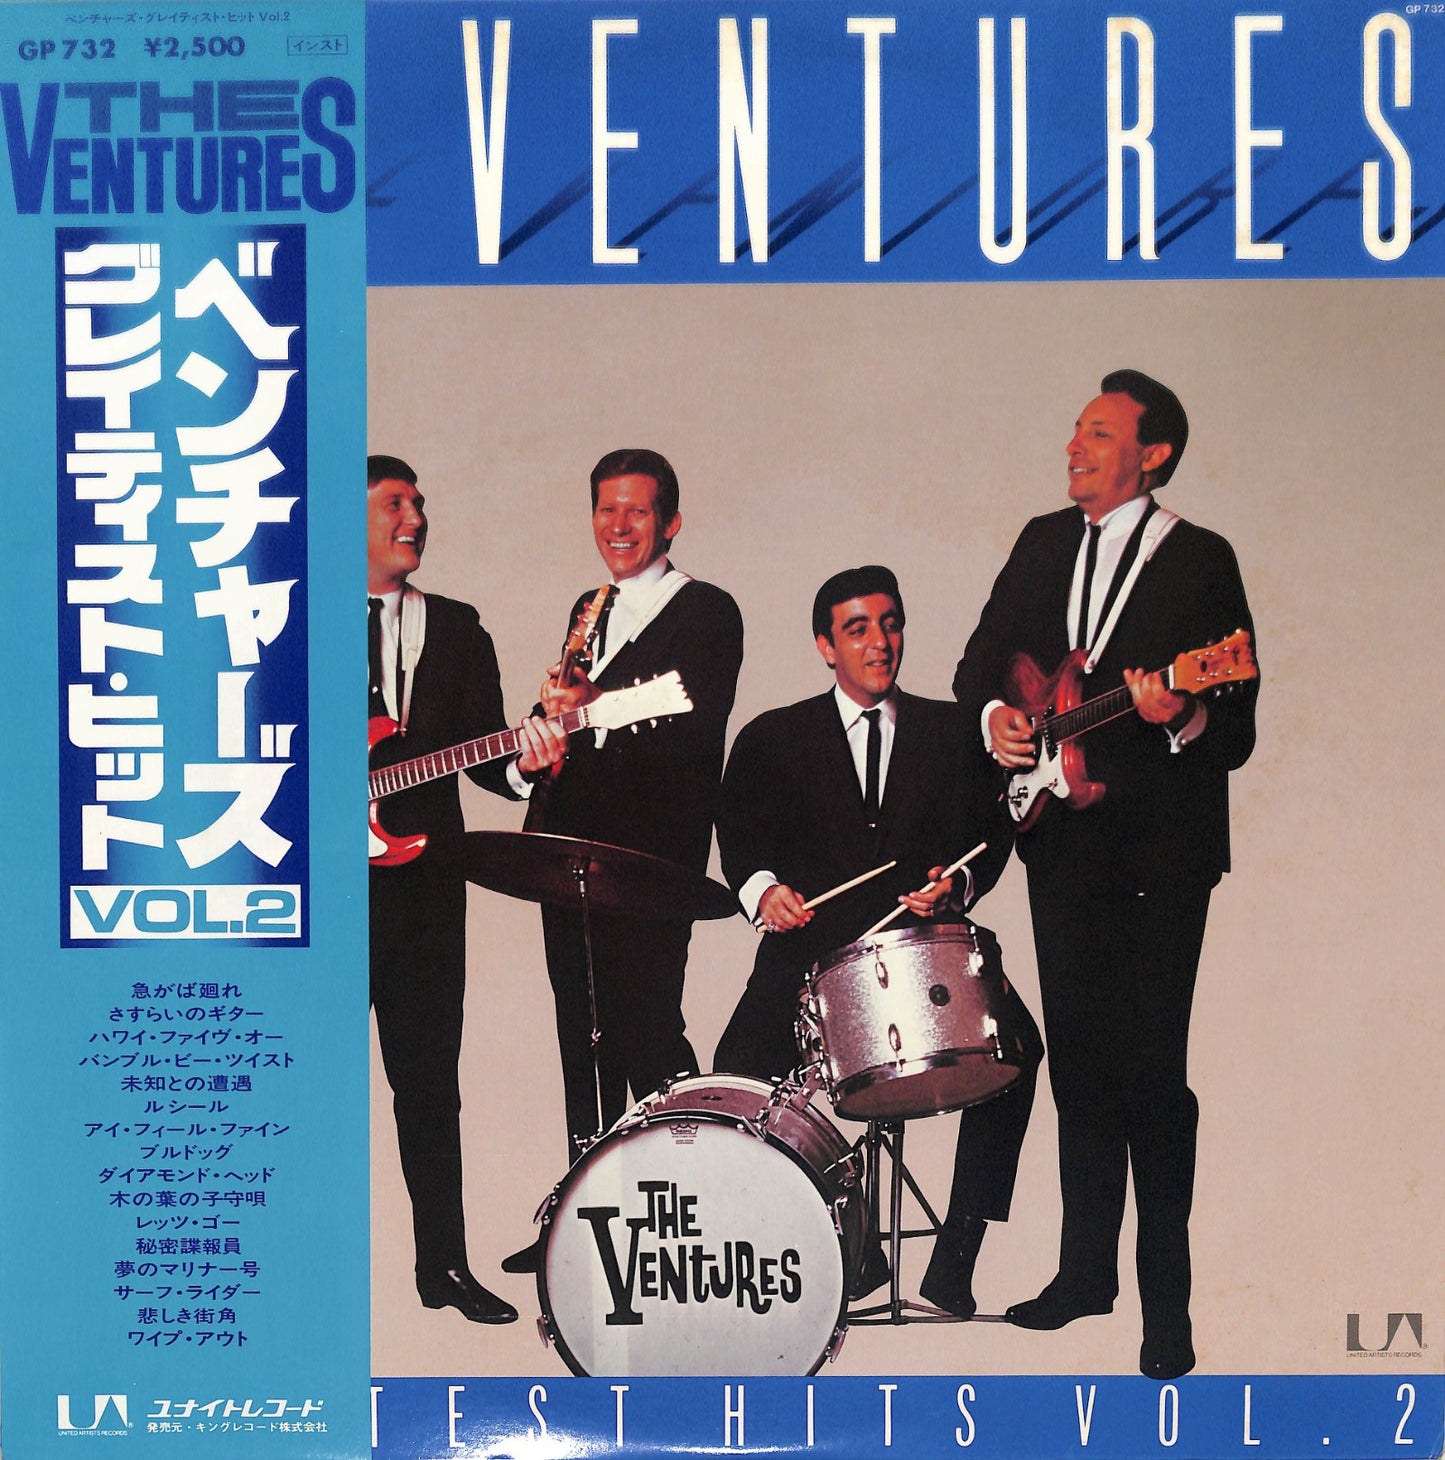 THE VENTURES - Greatest Hits Vol.2